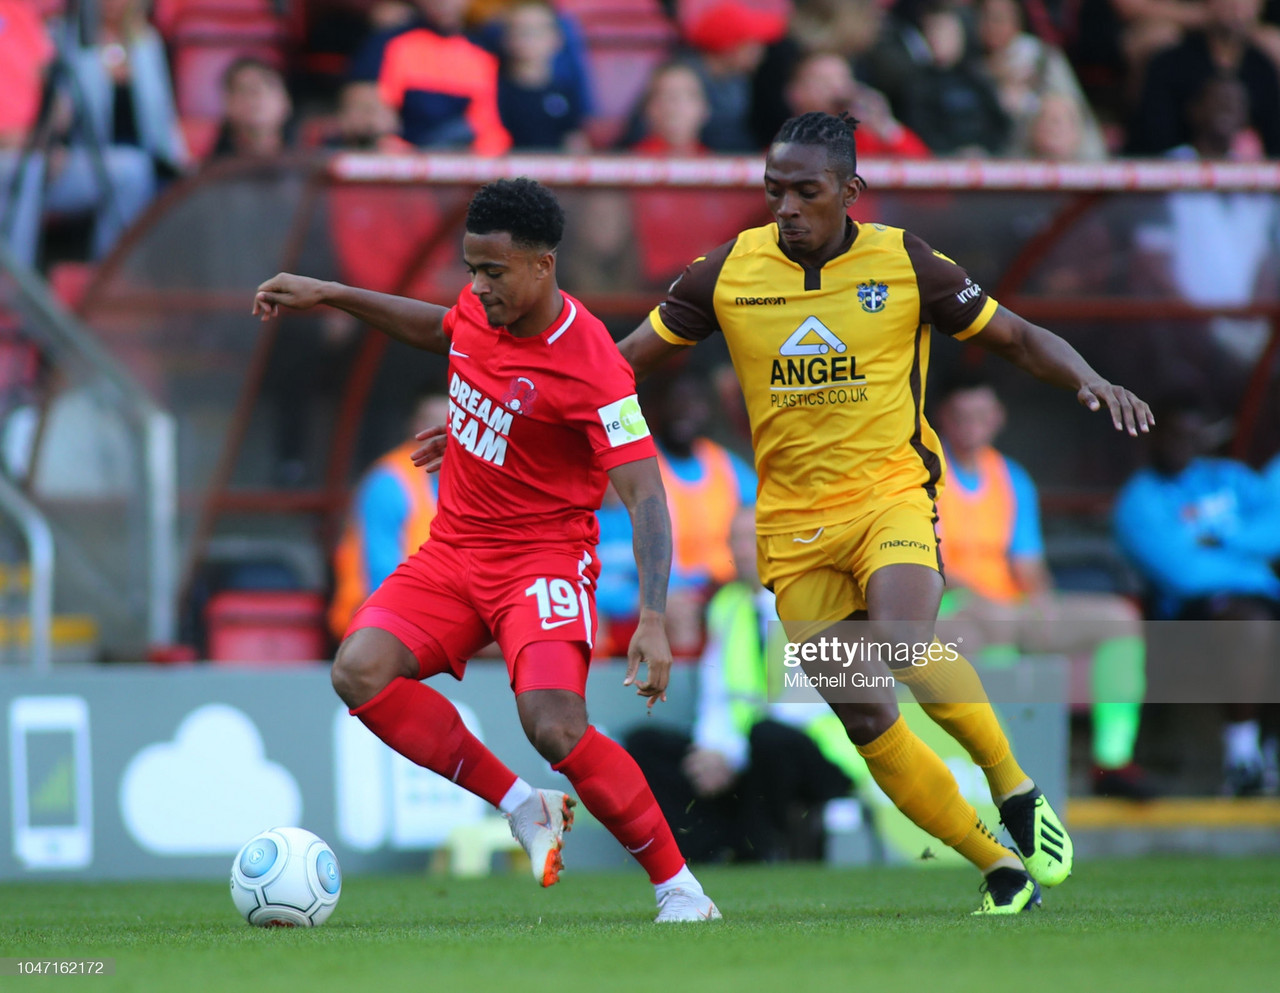 Leyton Orient vs Sutton United preview: How to watch, team news, kick-off time, predicted lineups and ones to watch 